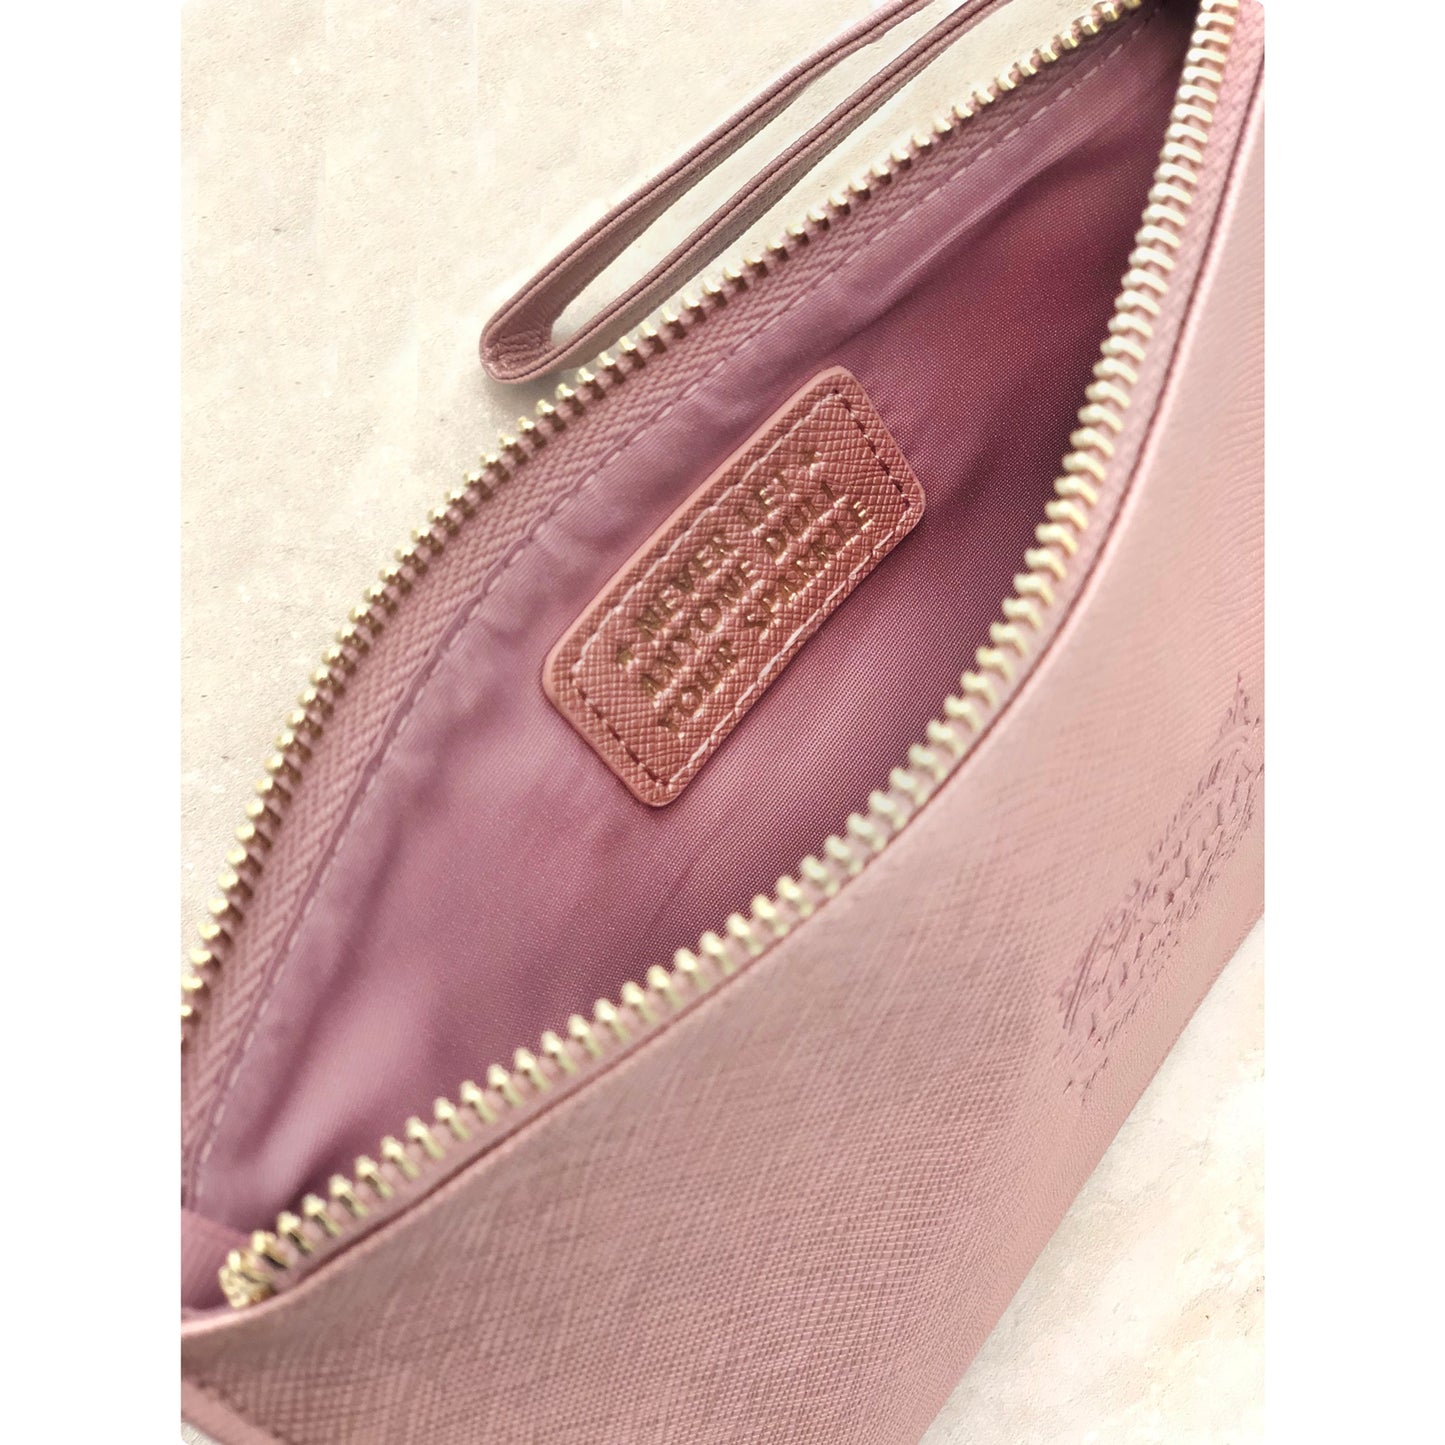 Clutch Bag With Handle & Embossed Text "Lucy"